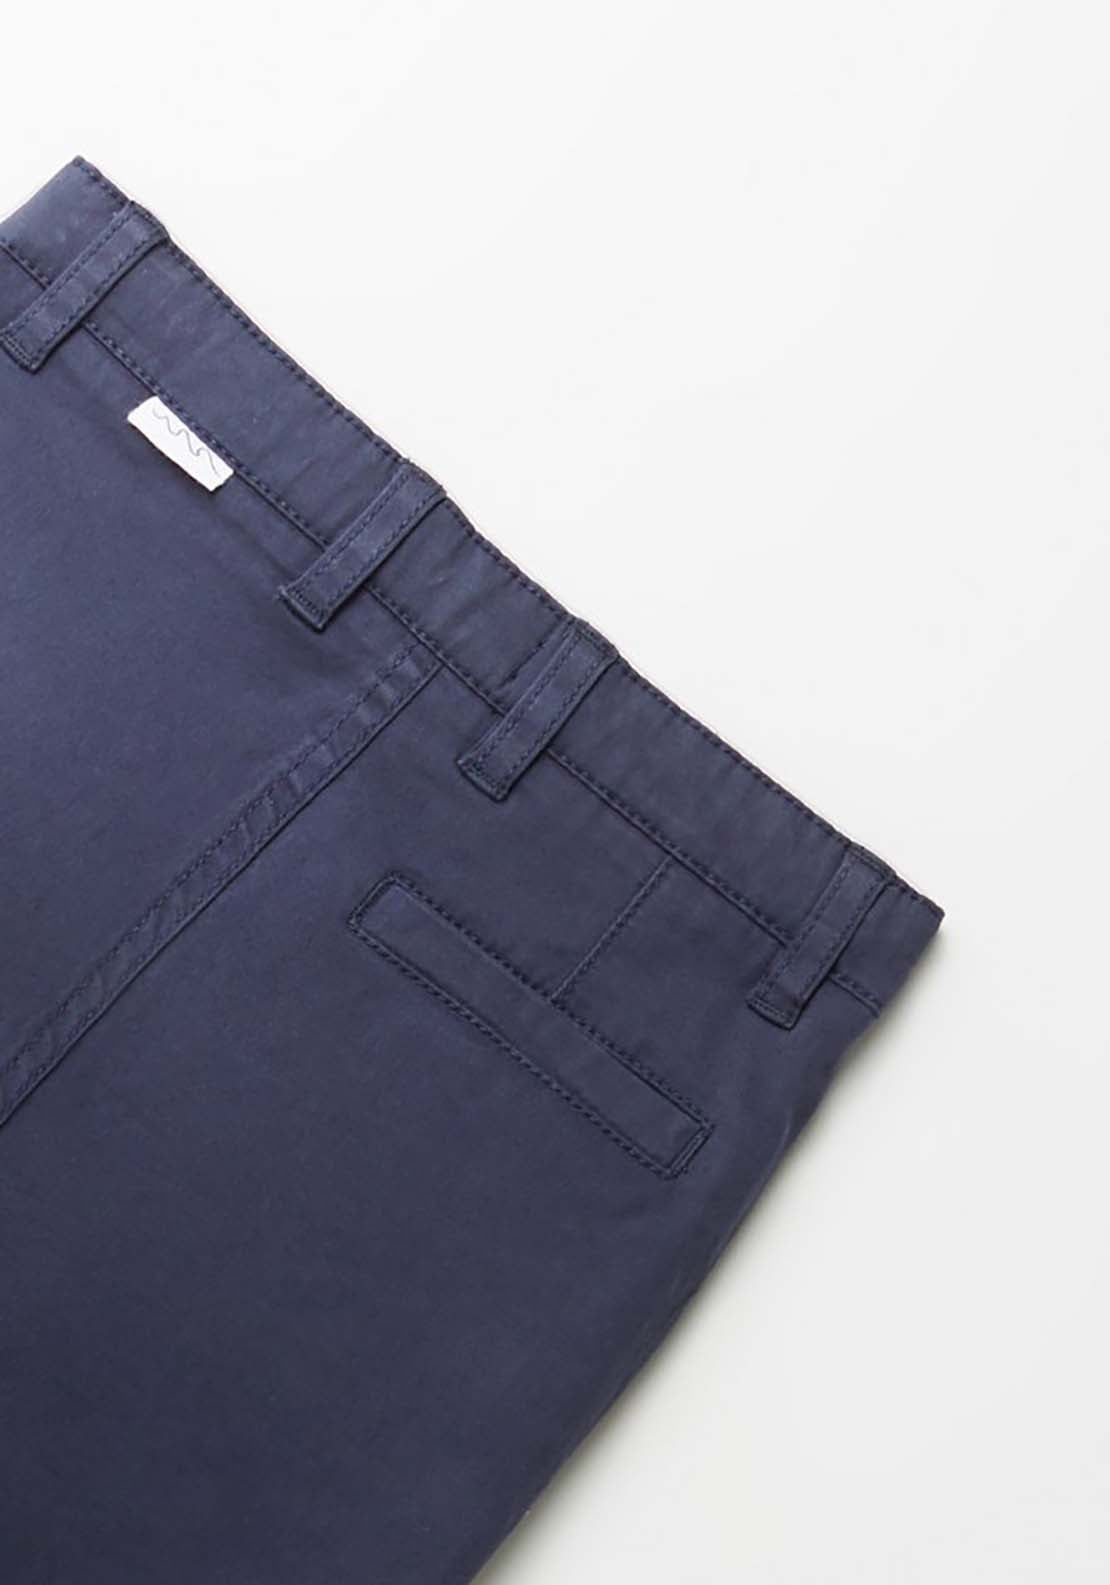 Sfera Formal Plain Trousers - Navy / Blue 3 Shaws Department Stores